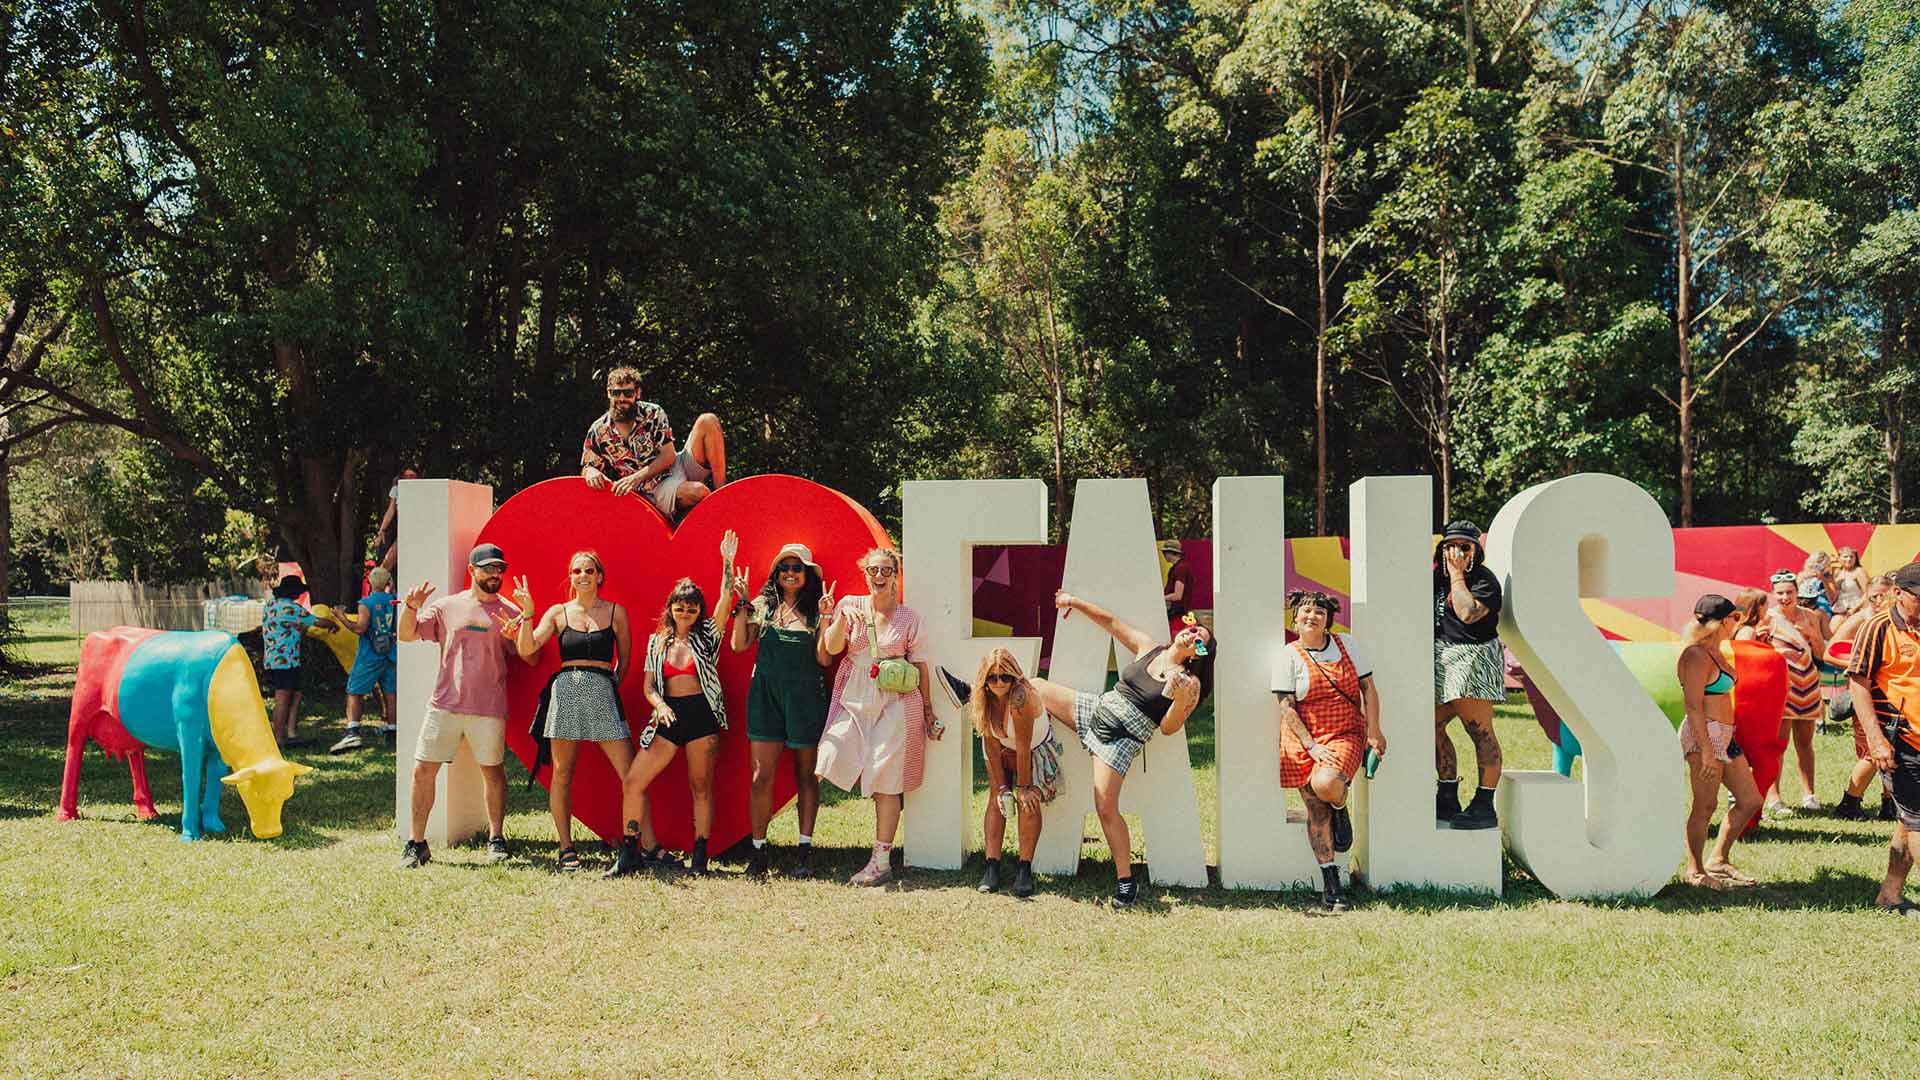 Just In: Falls Festival Is Taking a Year Off and Won't Host Any Fests Over Summer 2023–24